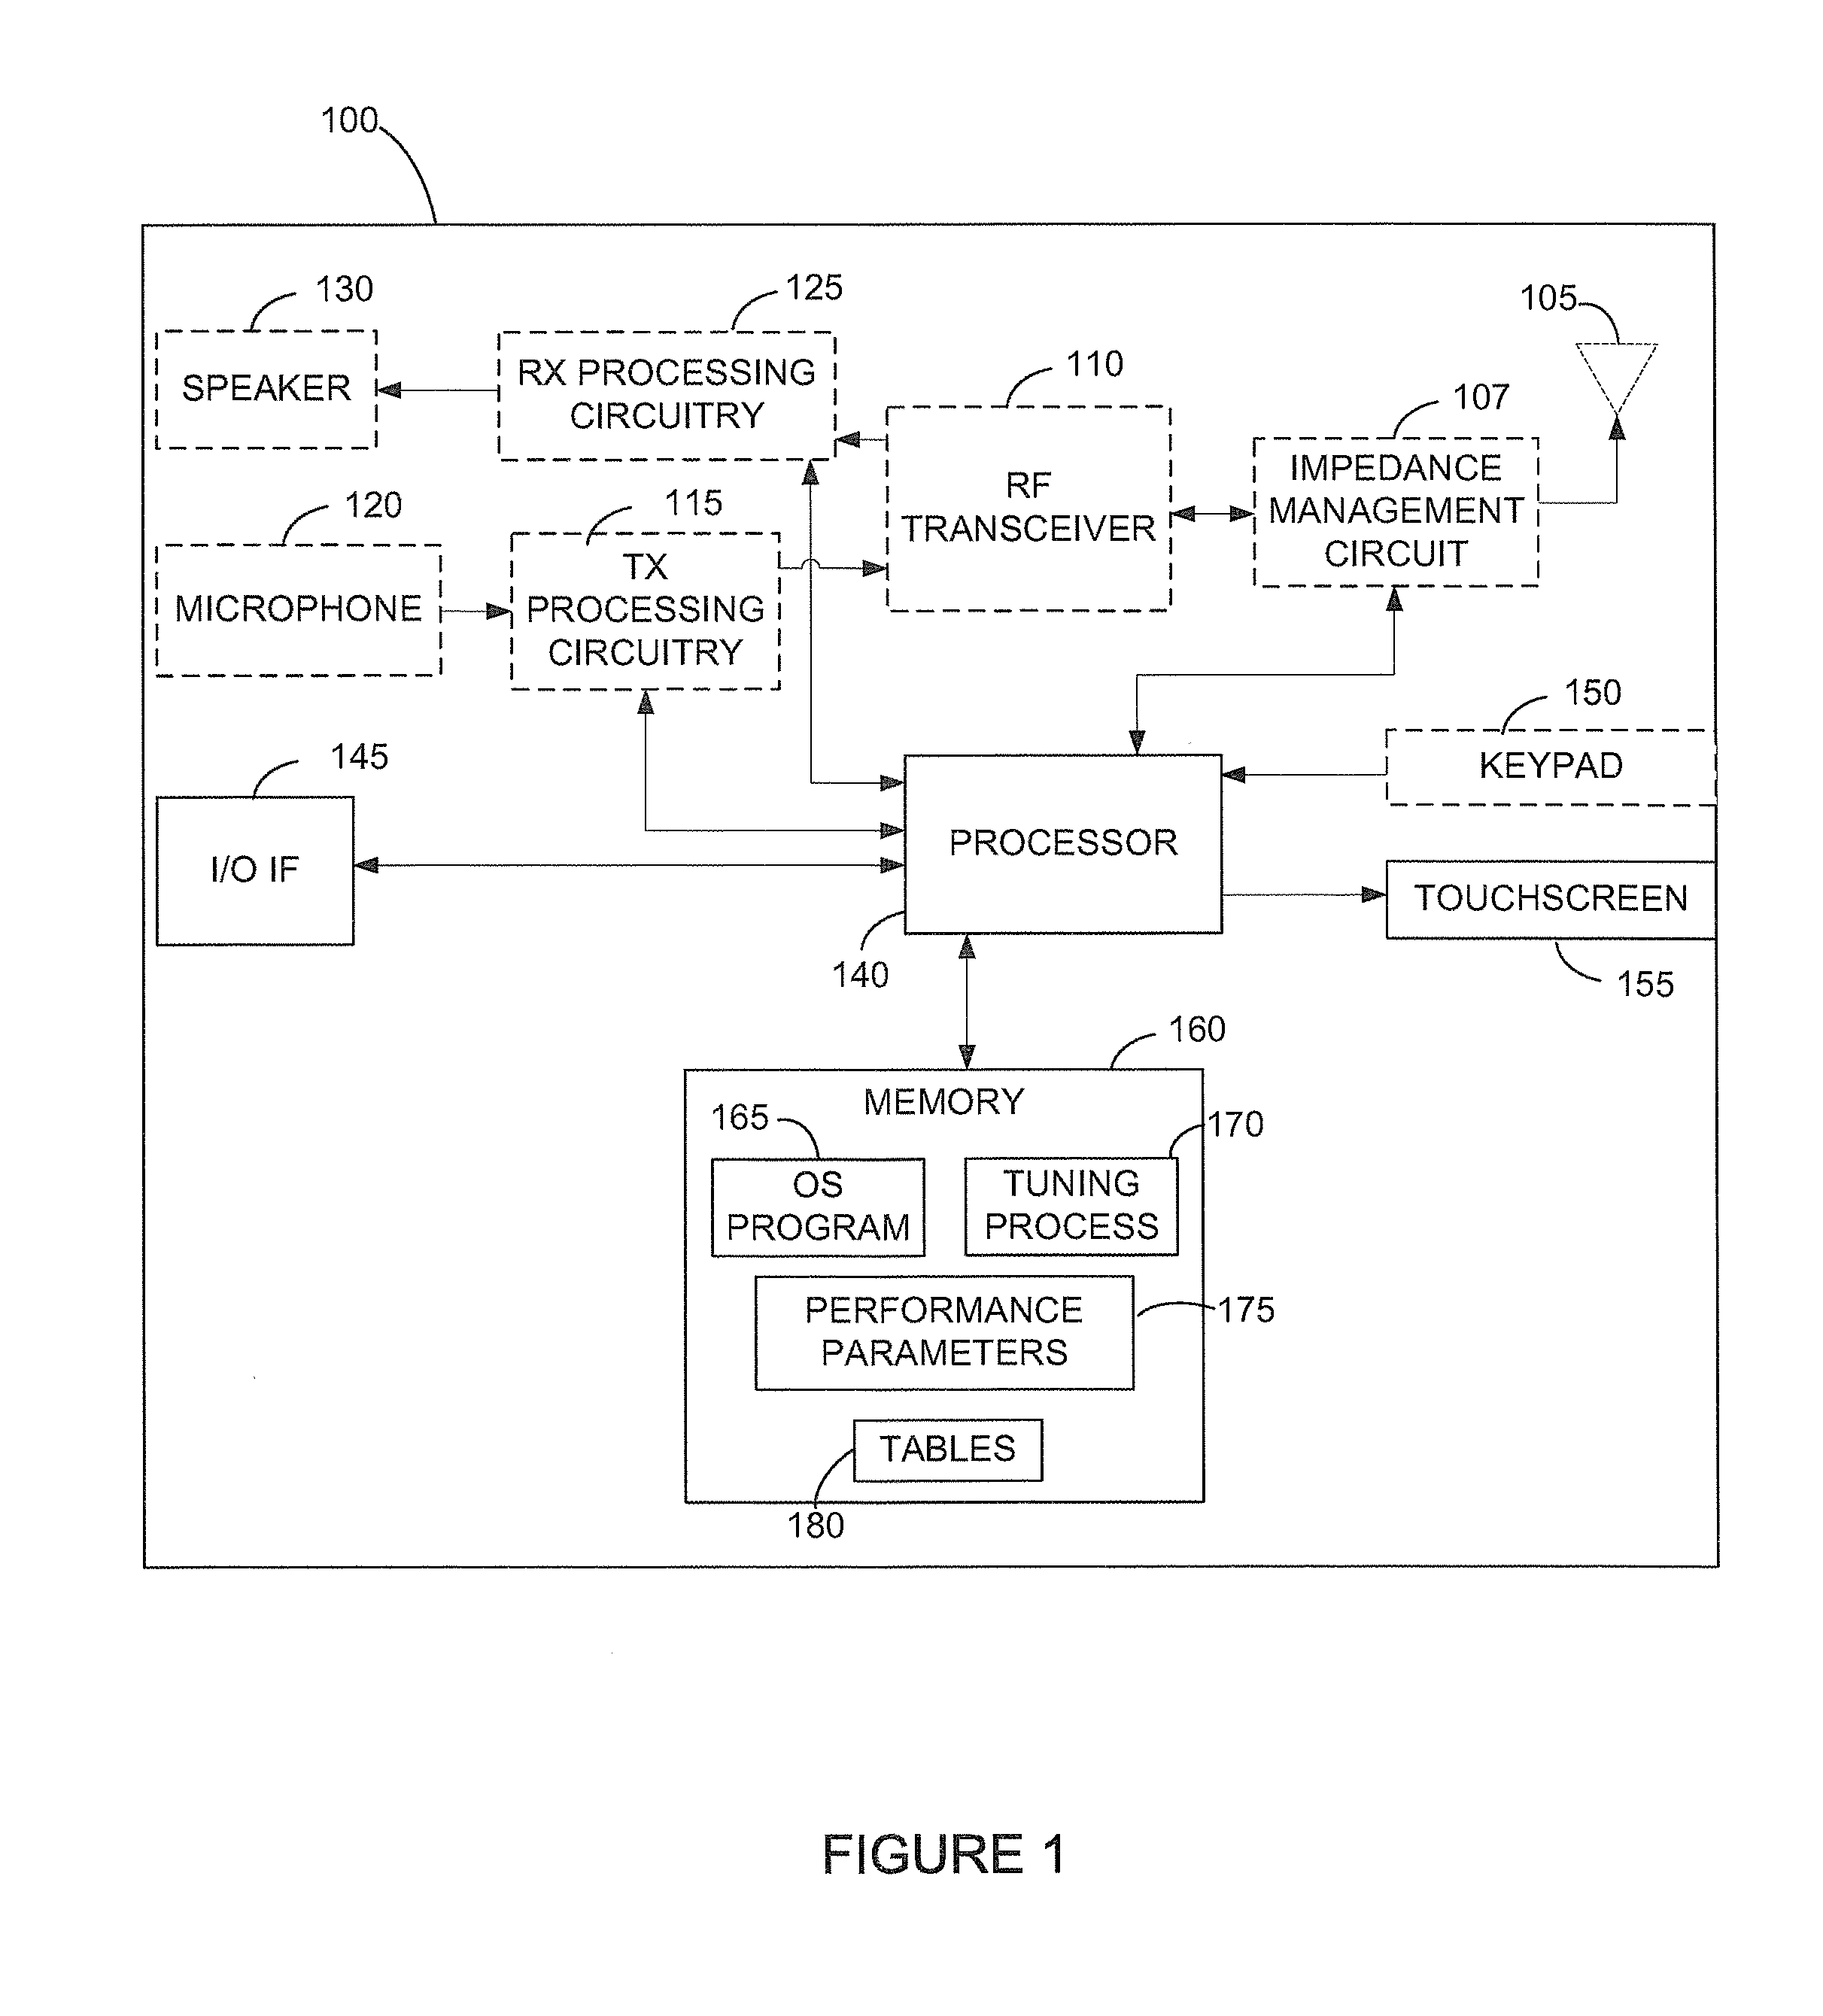 Apparatus and method for controlling a tunable matching network in a wireless network